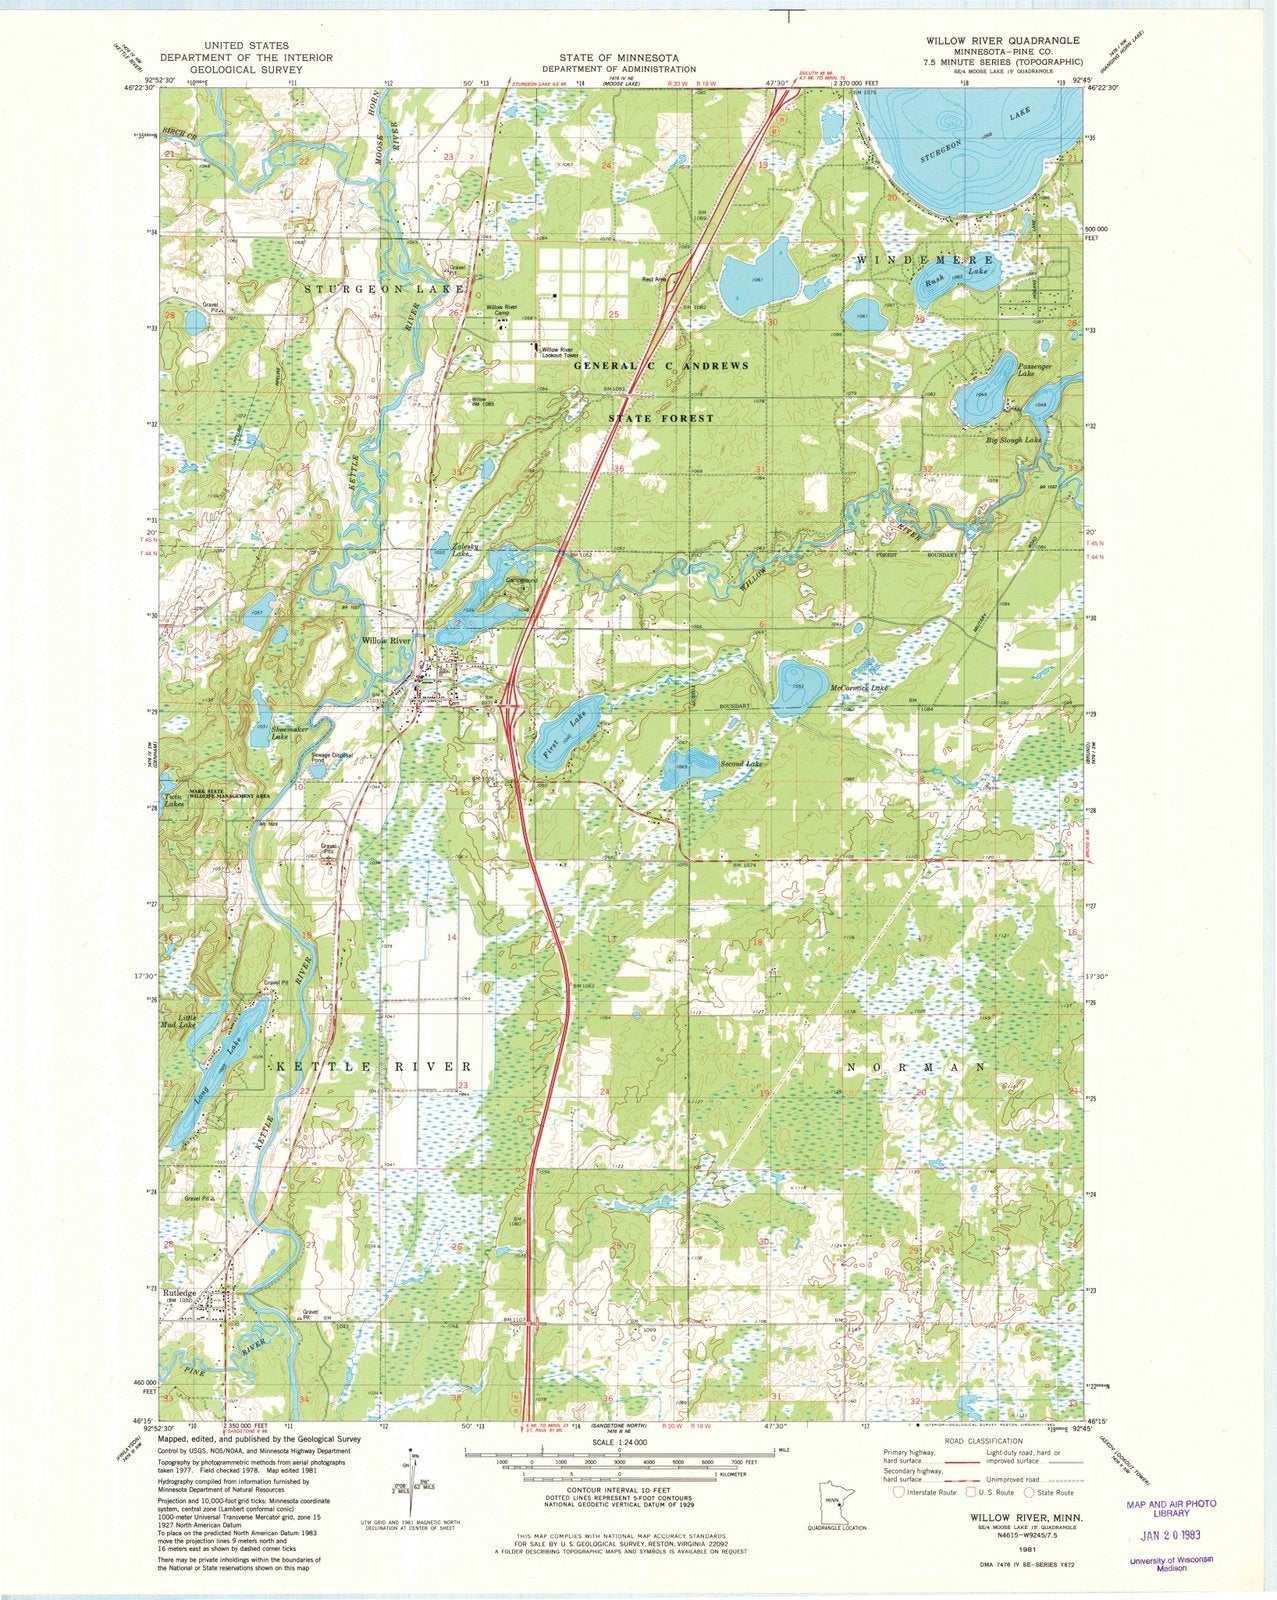 1981 Willow River, MN - Minnesota - USGS Topographic Map